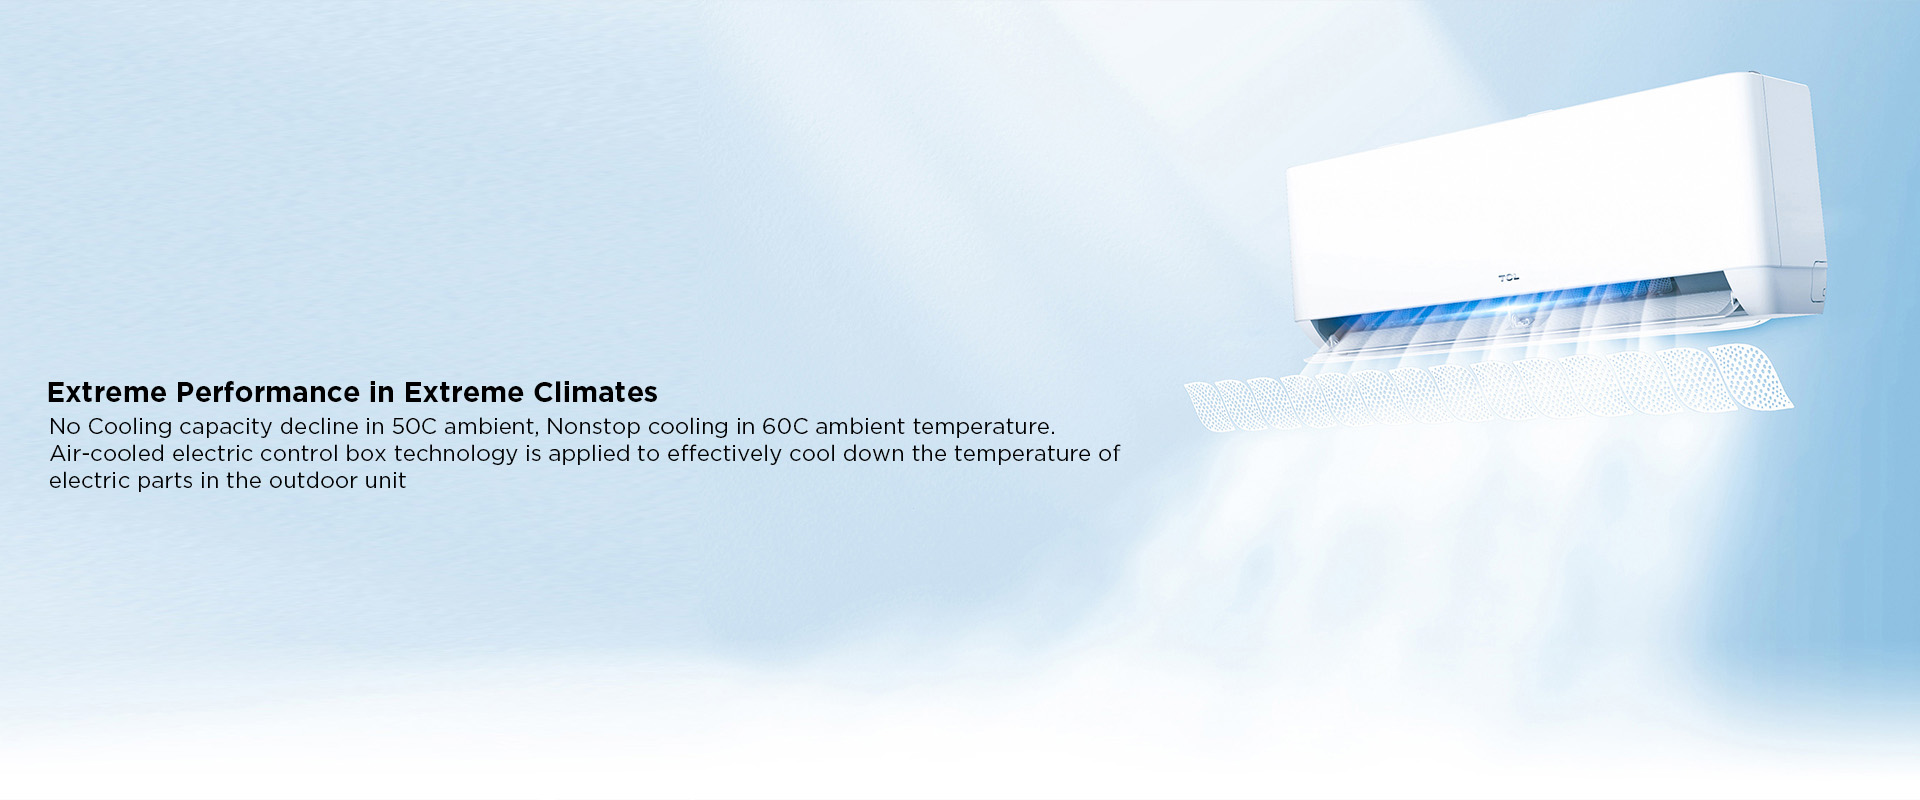 Extreme Performance in Extreme Climates - No Cooling capacity decline in 50C ambient, Nonstop cooling in 60C ambient temperature. Air-cooled electric control box technology is applied to effectively cool down the temperature of electric parts in the outdoor unit 